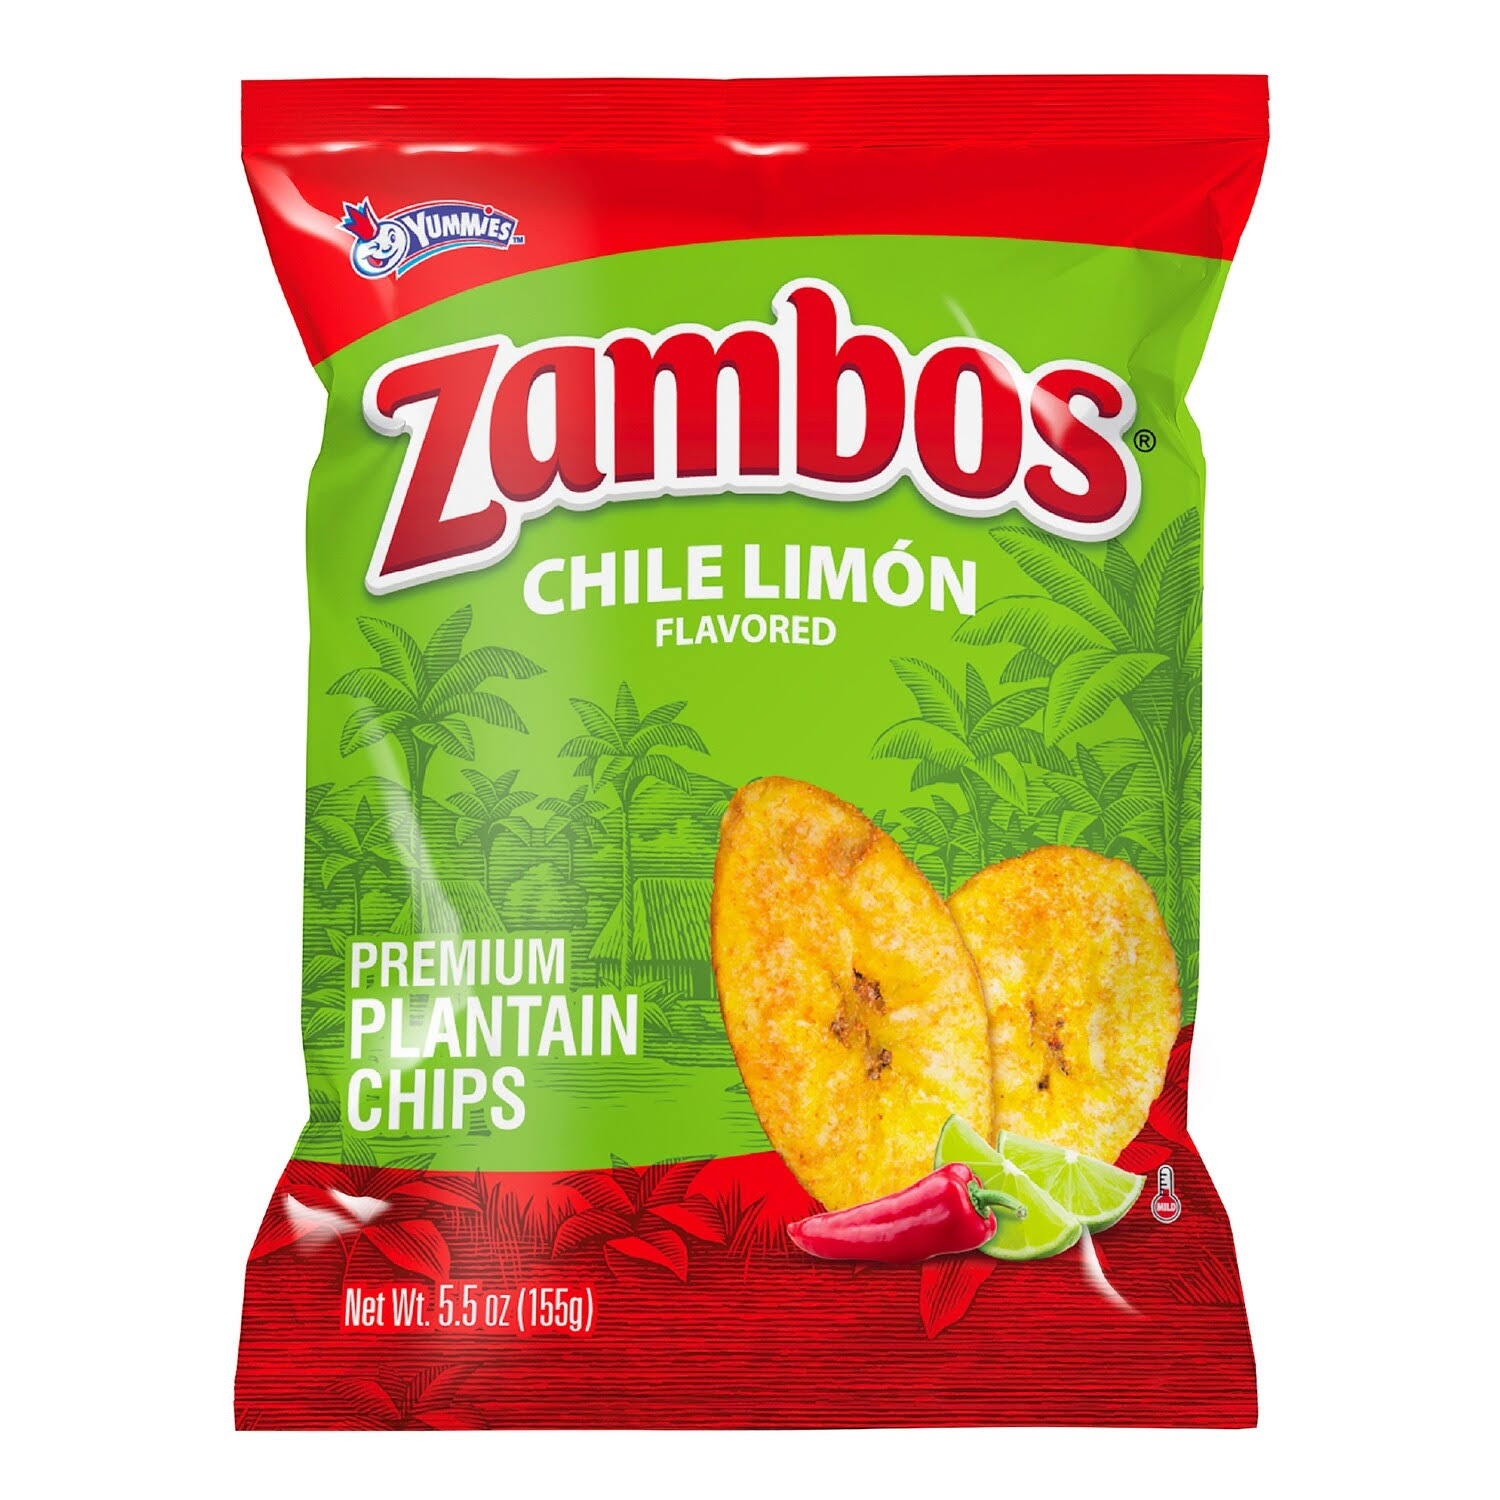 Zambos Plantain Chips, Chile Limon Flavored - 5.5 oz